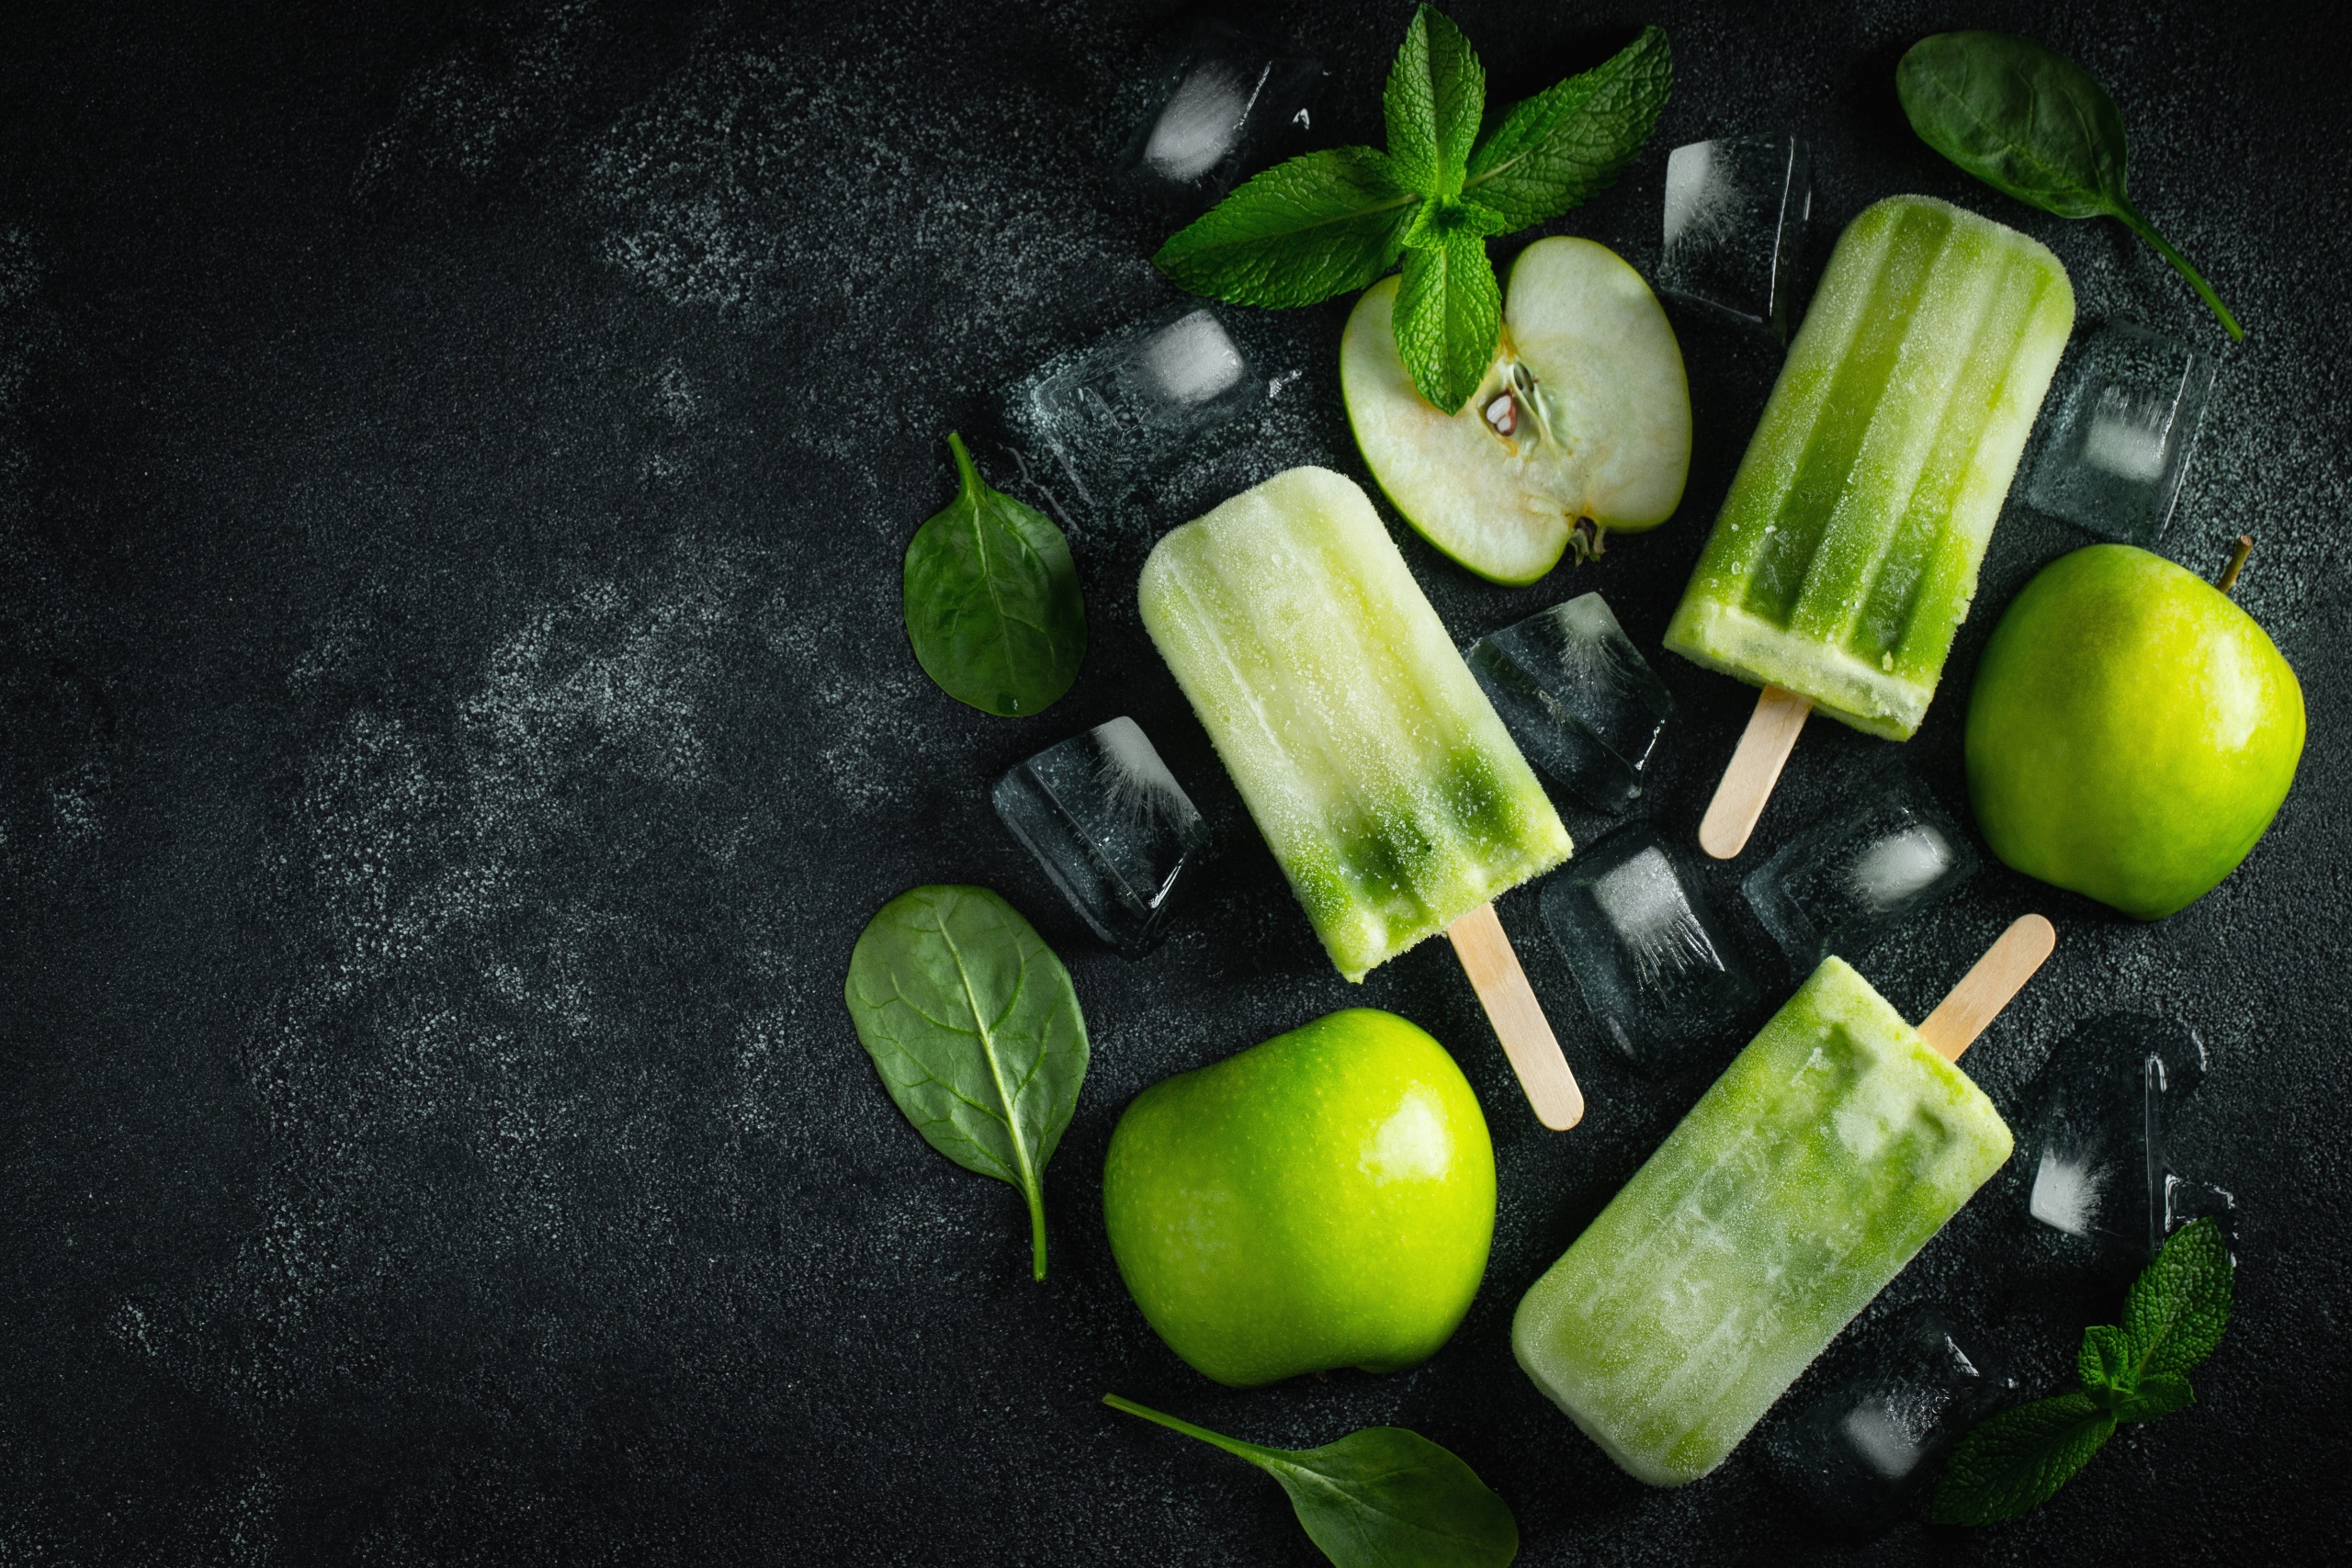 General 2560x1707 popsicle food fruit apples ice ice cubes mint leaves basil green spinach top view black background